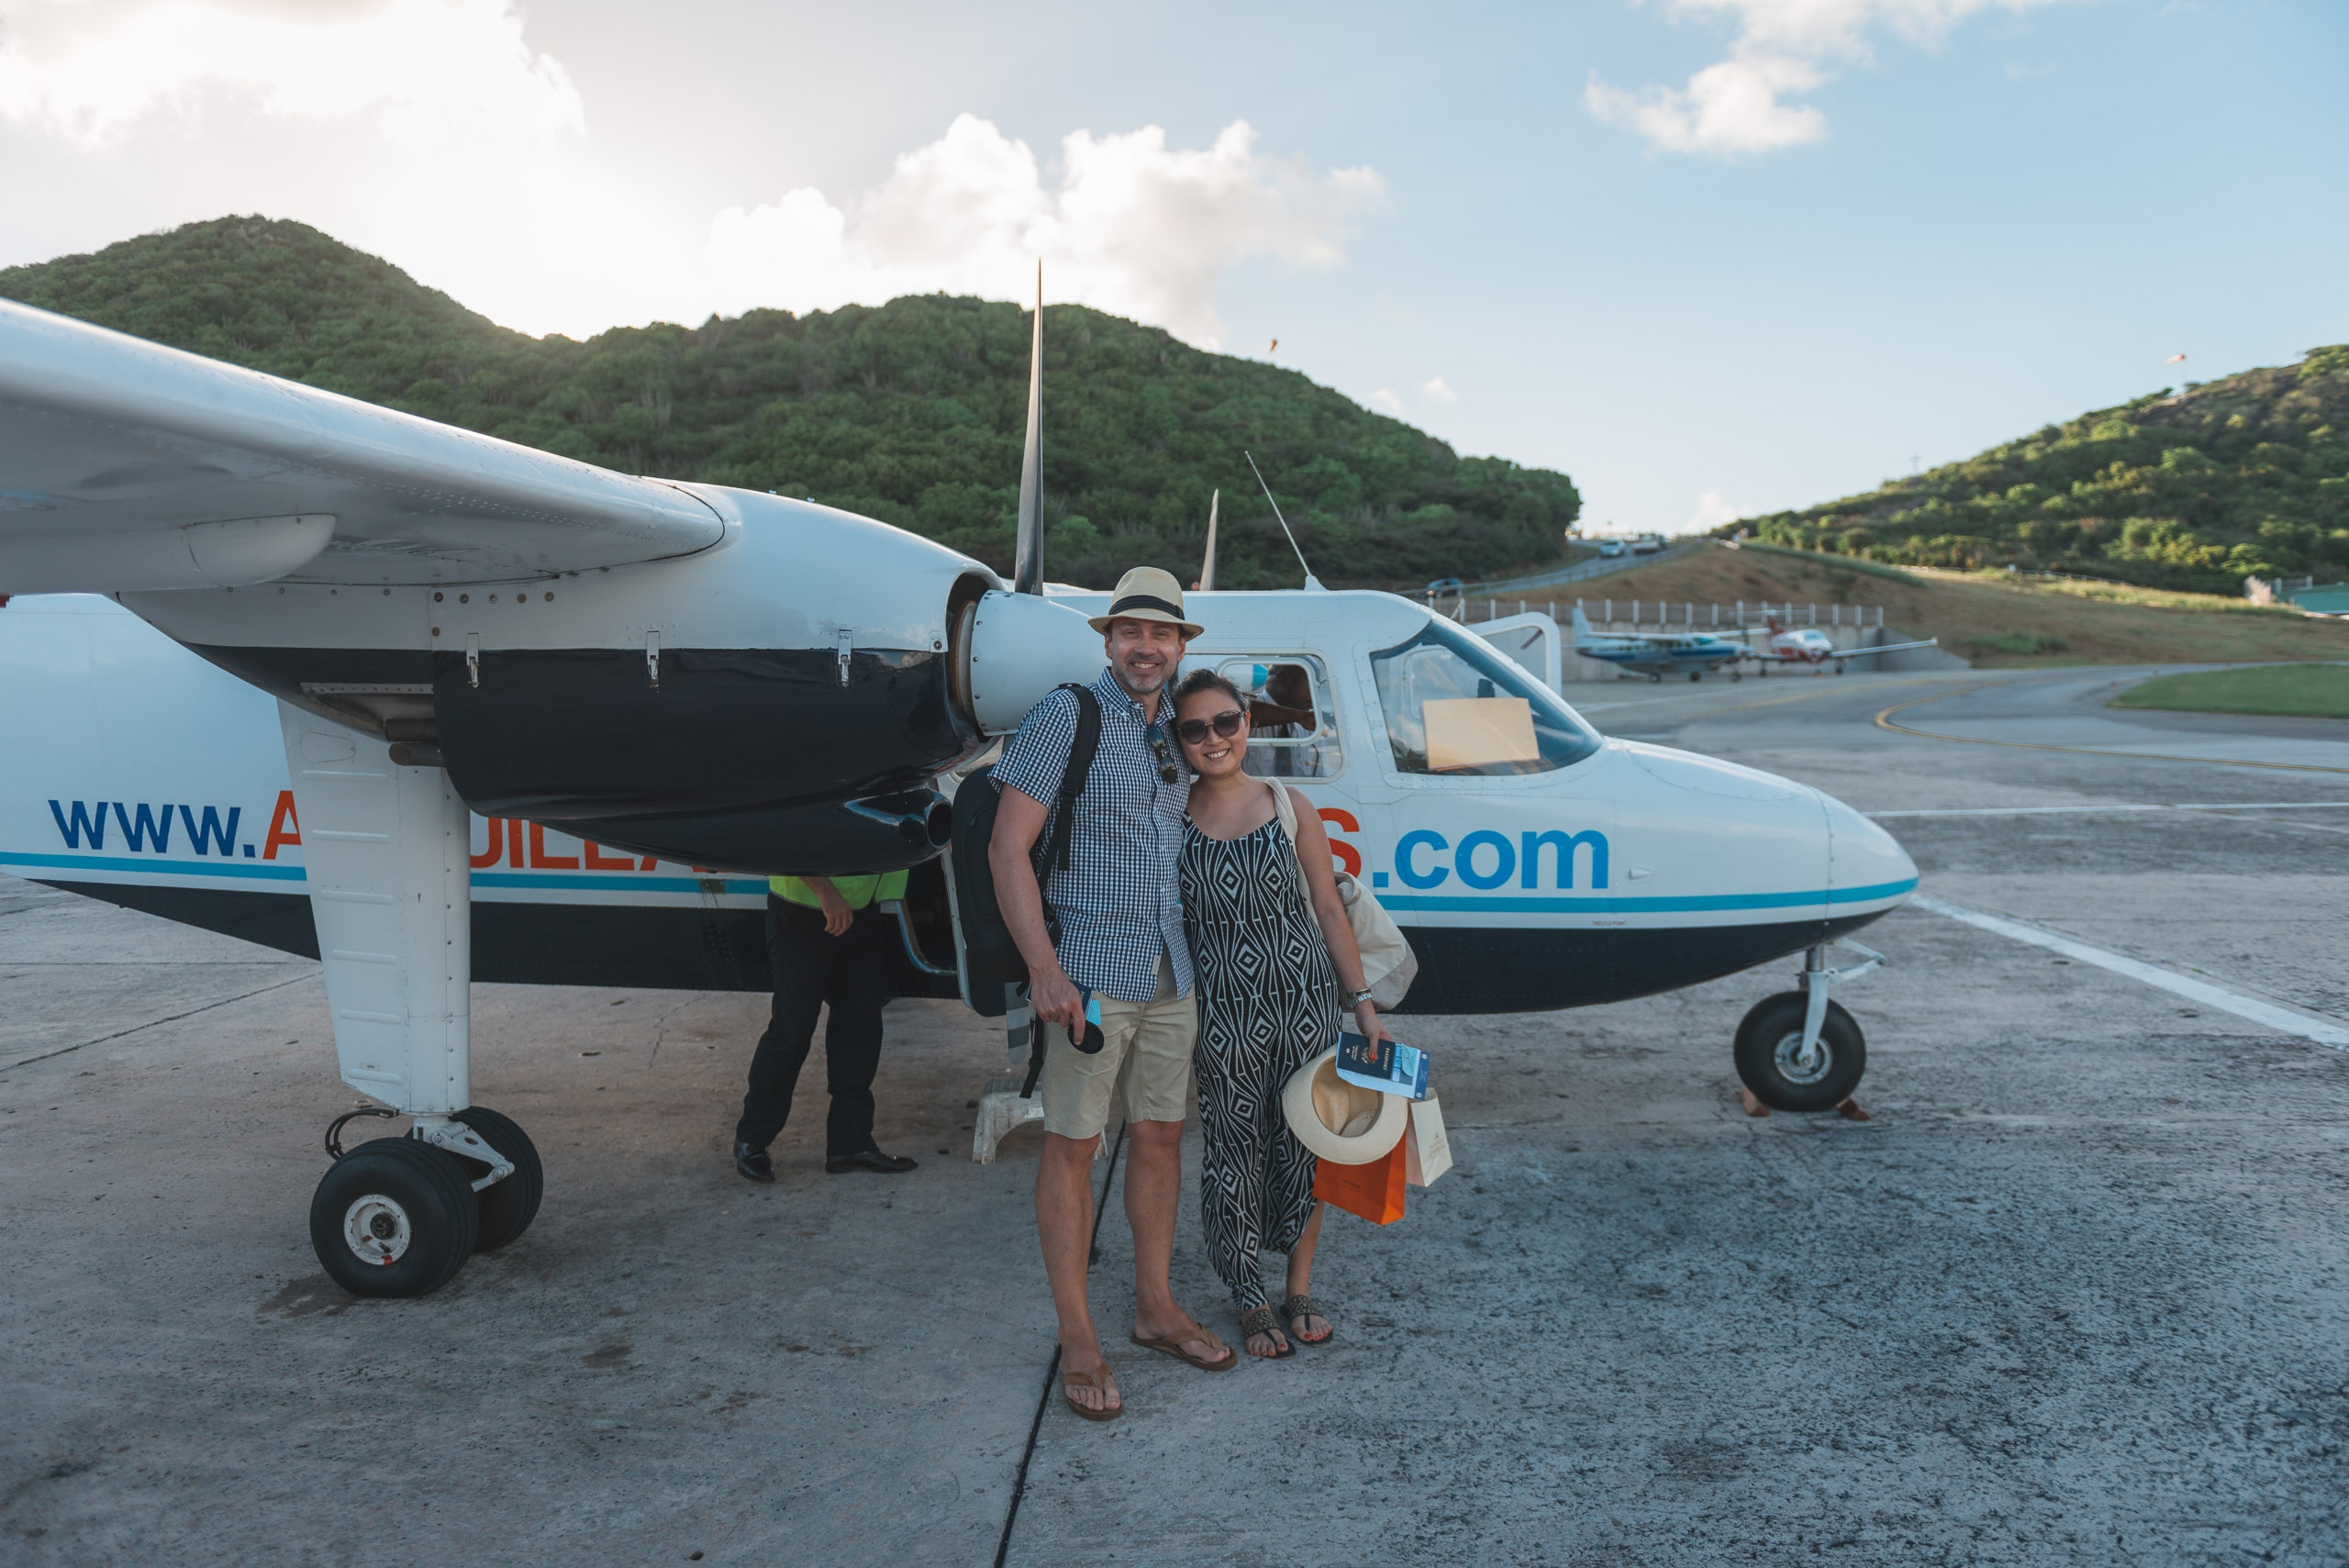 Our Ride Back to Anguilla